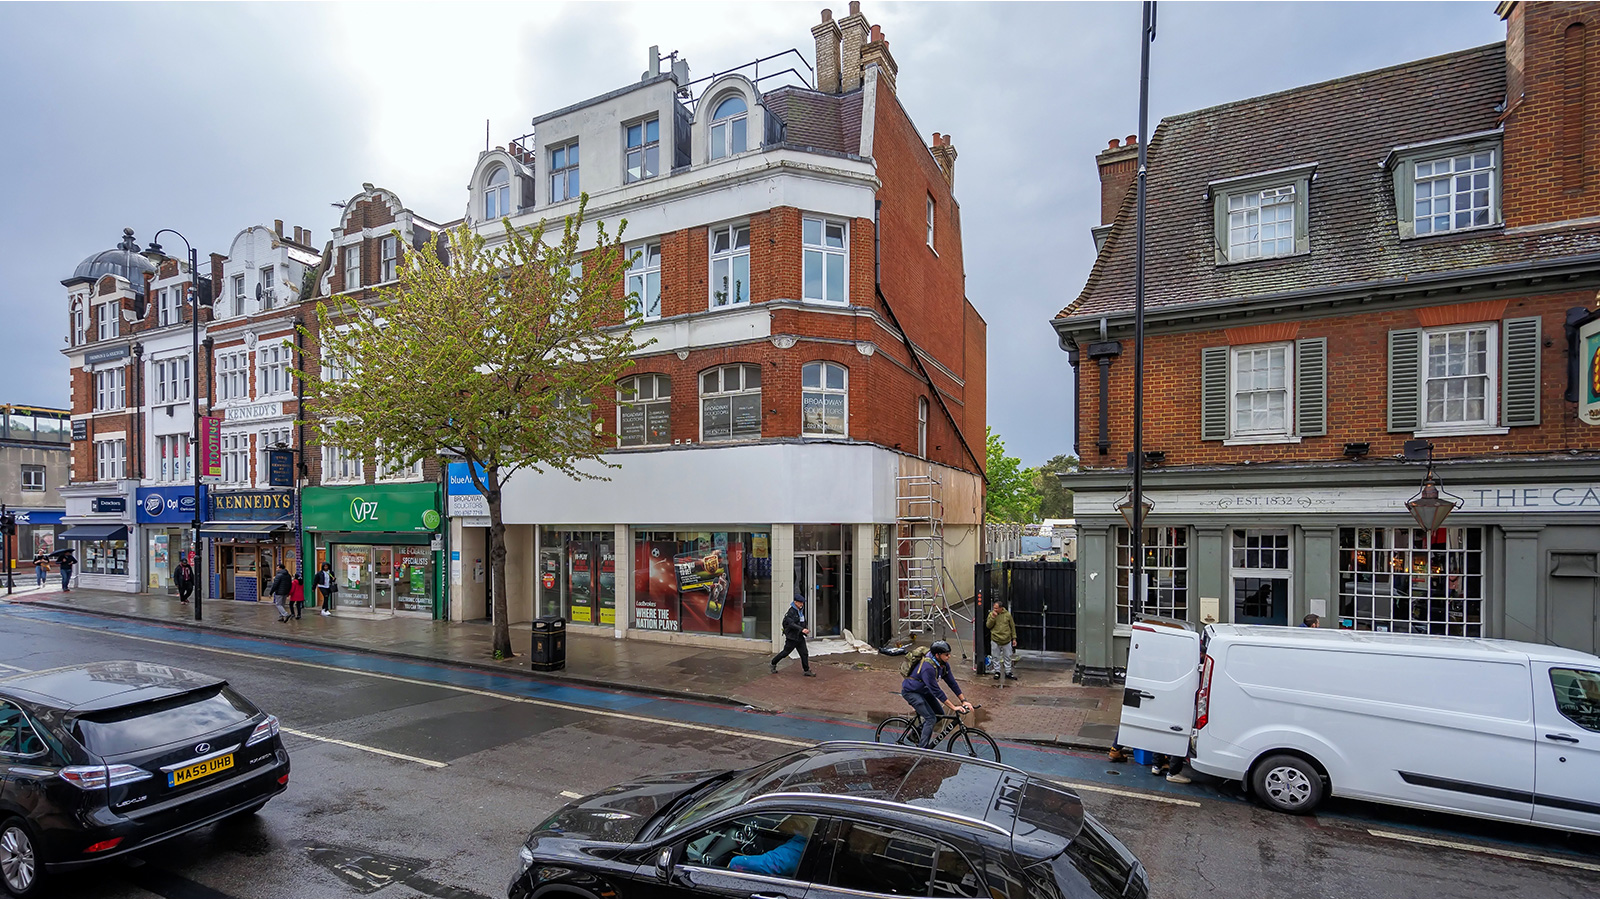 40 Tooting High Street<br>Tooting<br>London<br>SW17 0RG